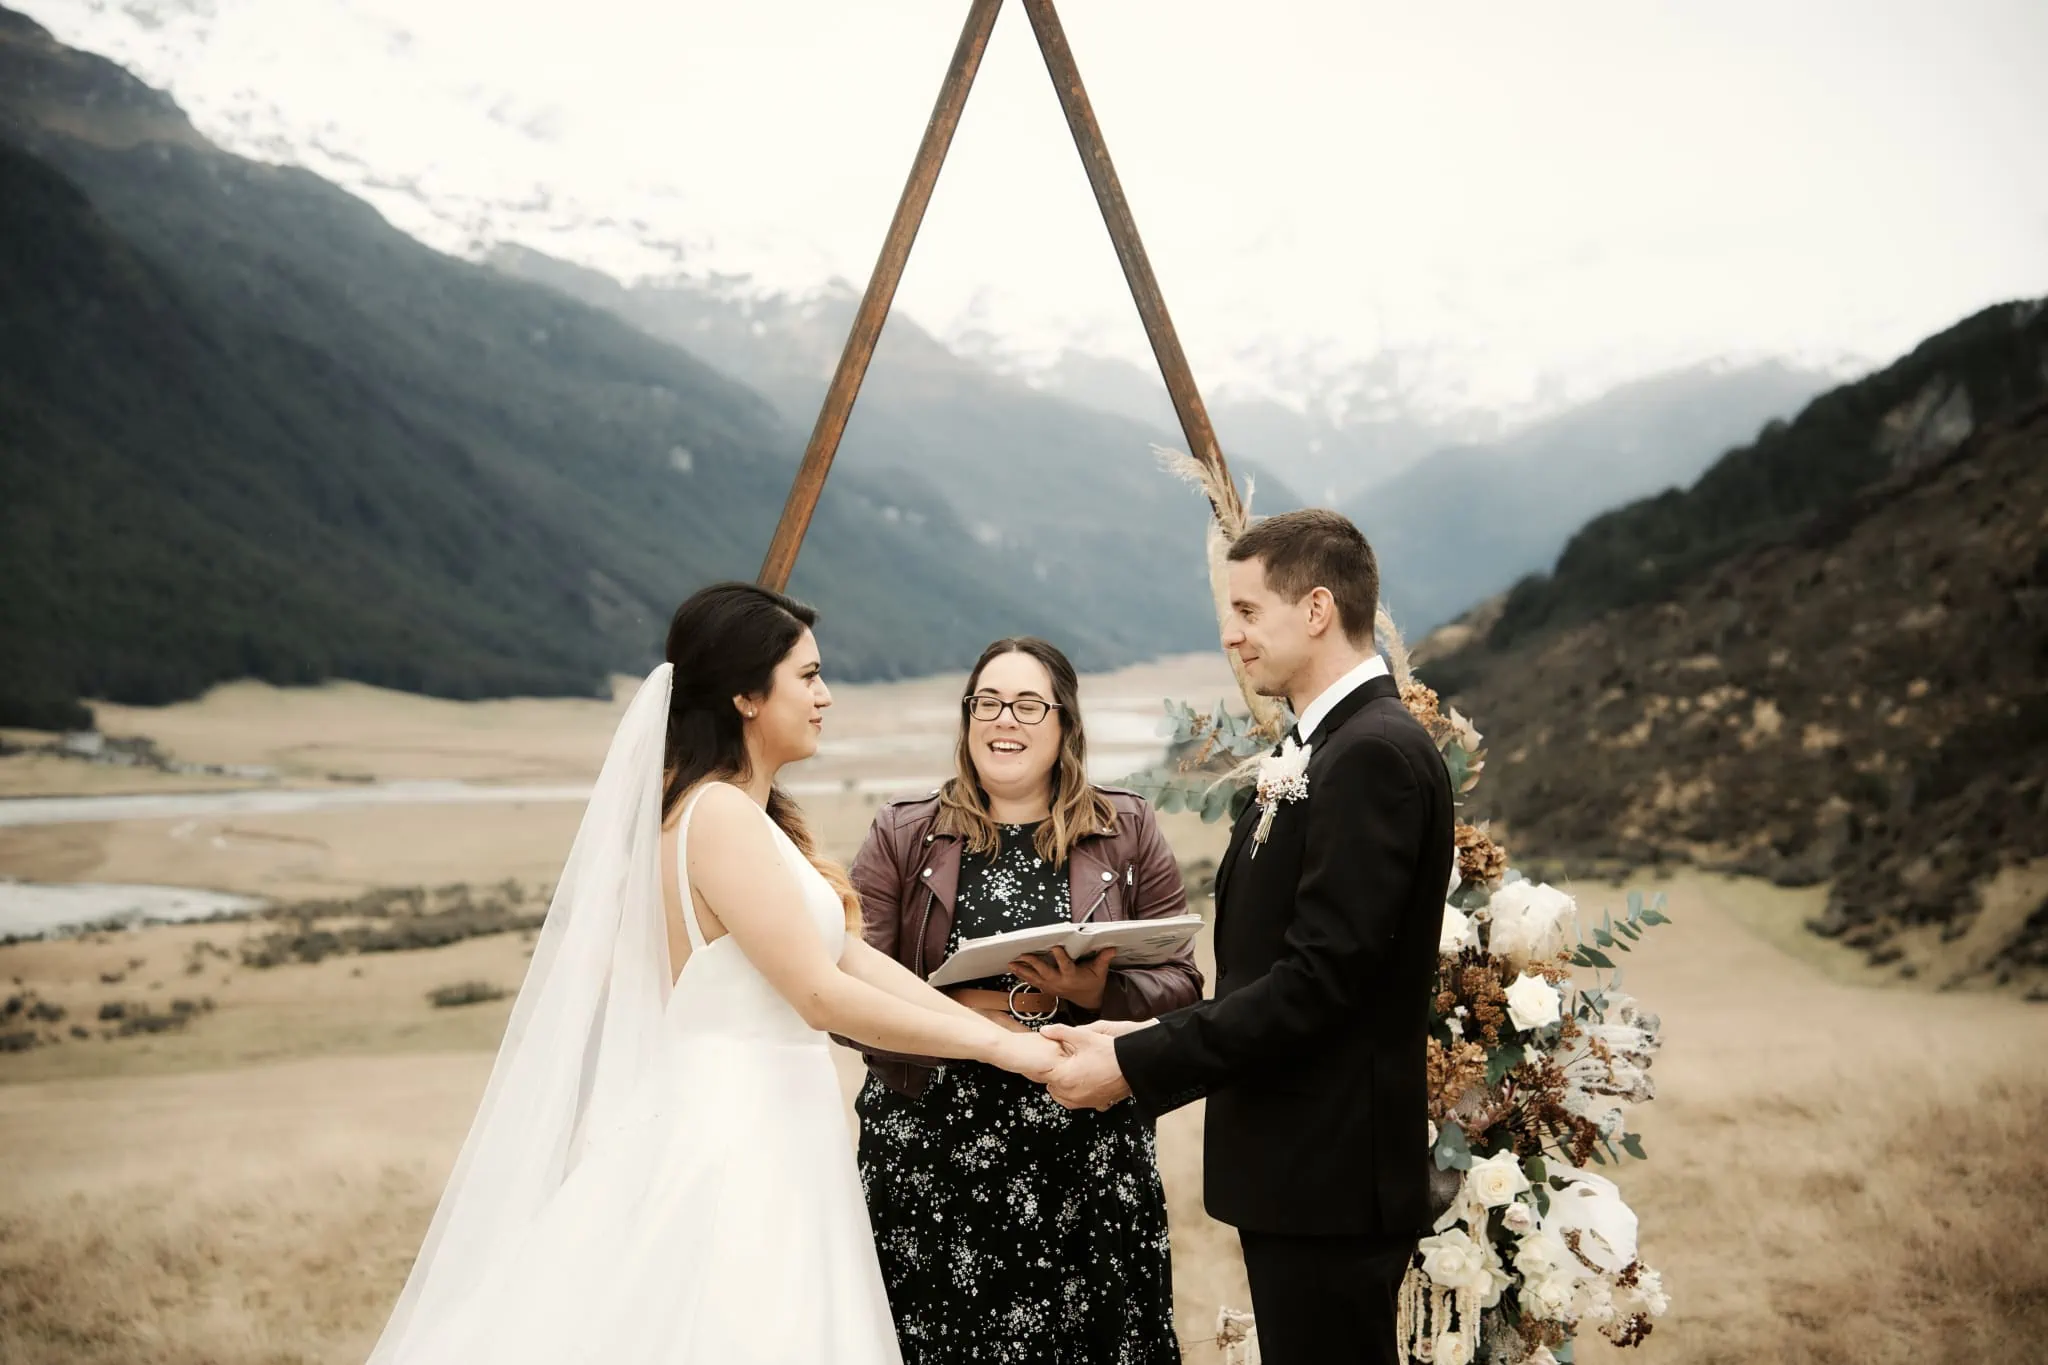 Michelle and Vedran elope, exchanging vows in front of a mountain at Rees Valley Station in New Zealand.